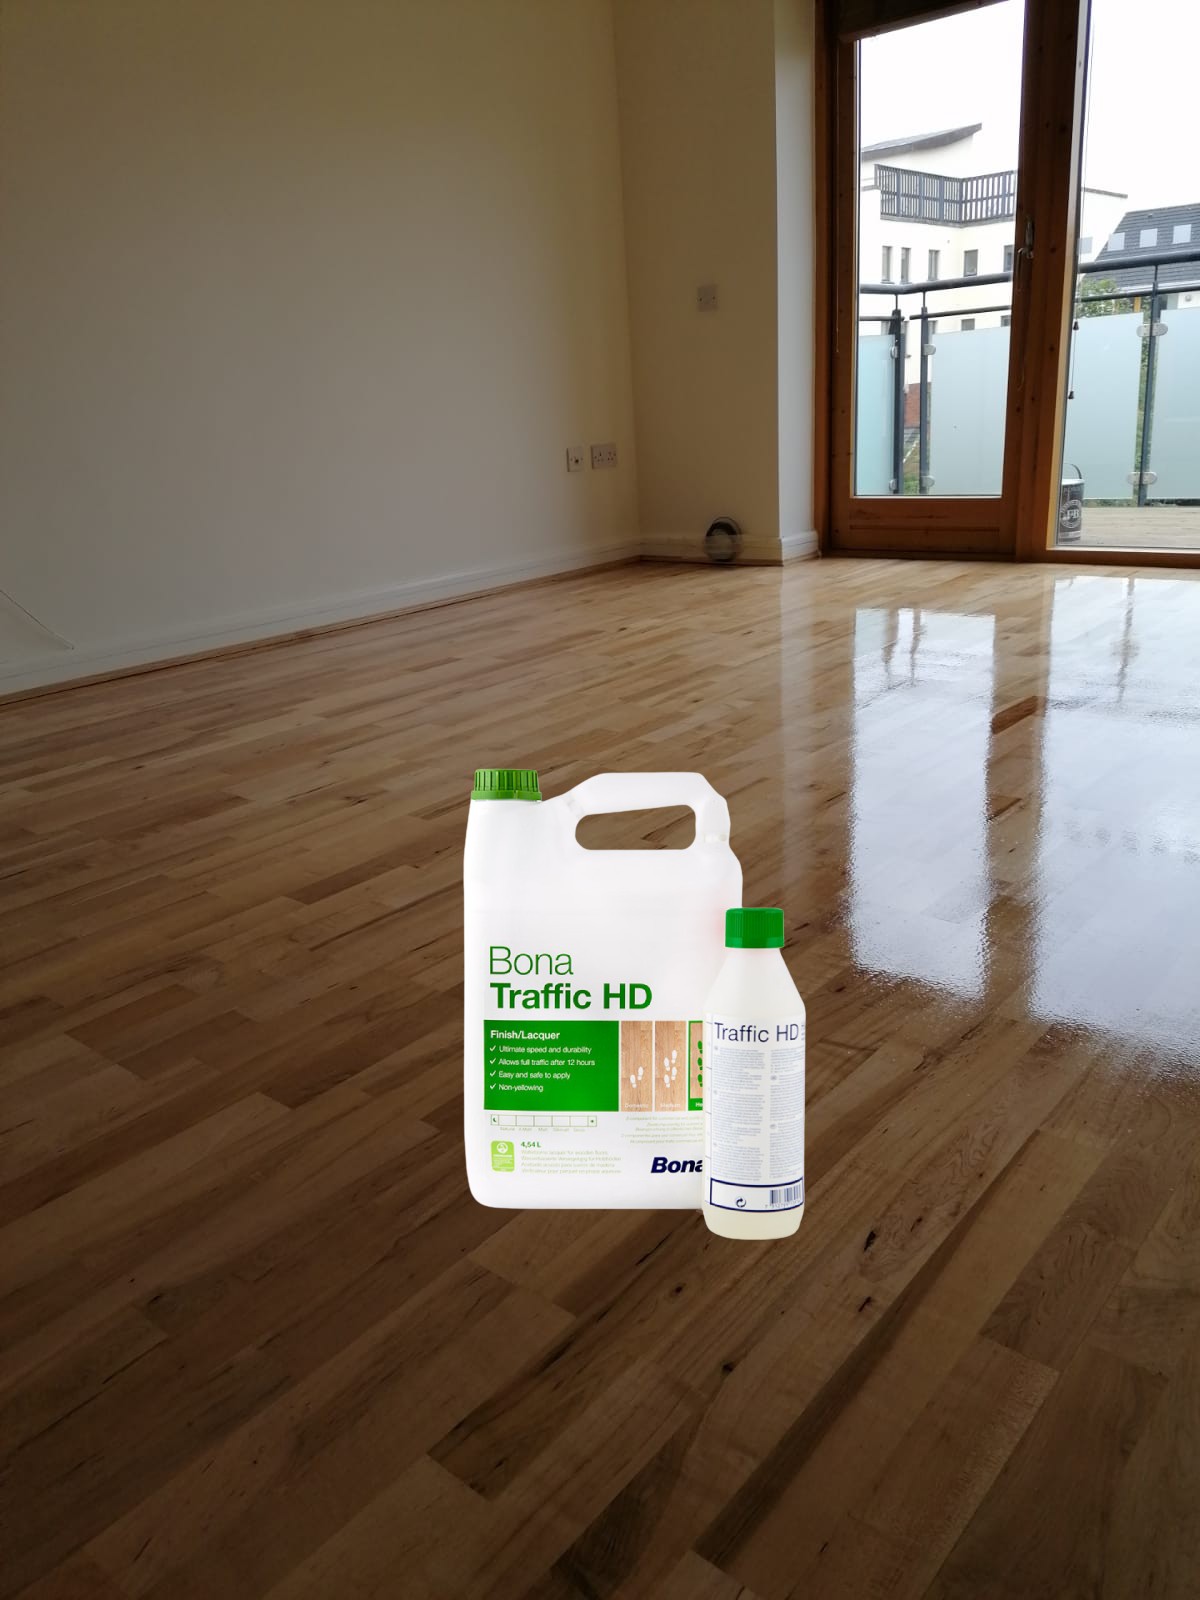 https://woodcareproducts.ie/product/bona-traffic-hd-floor-lacquer/